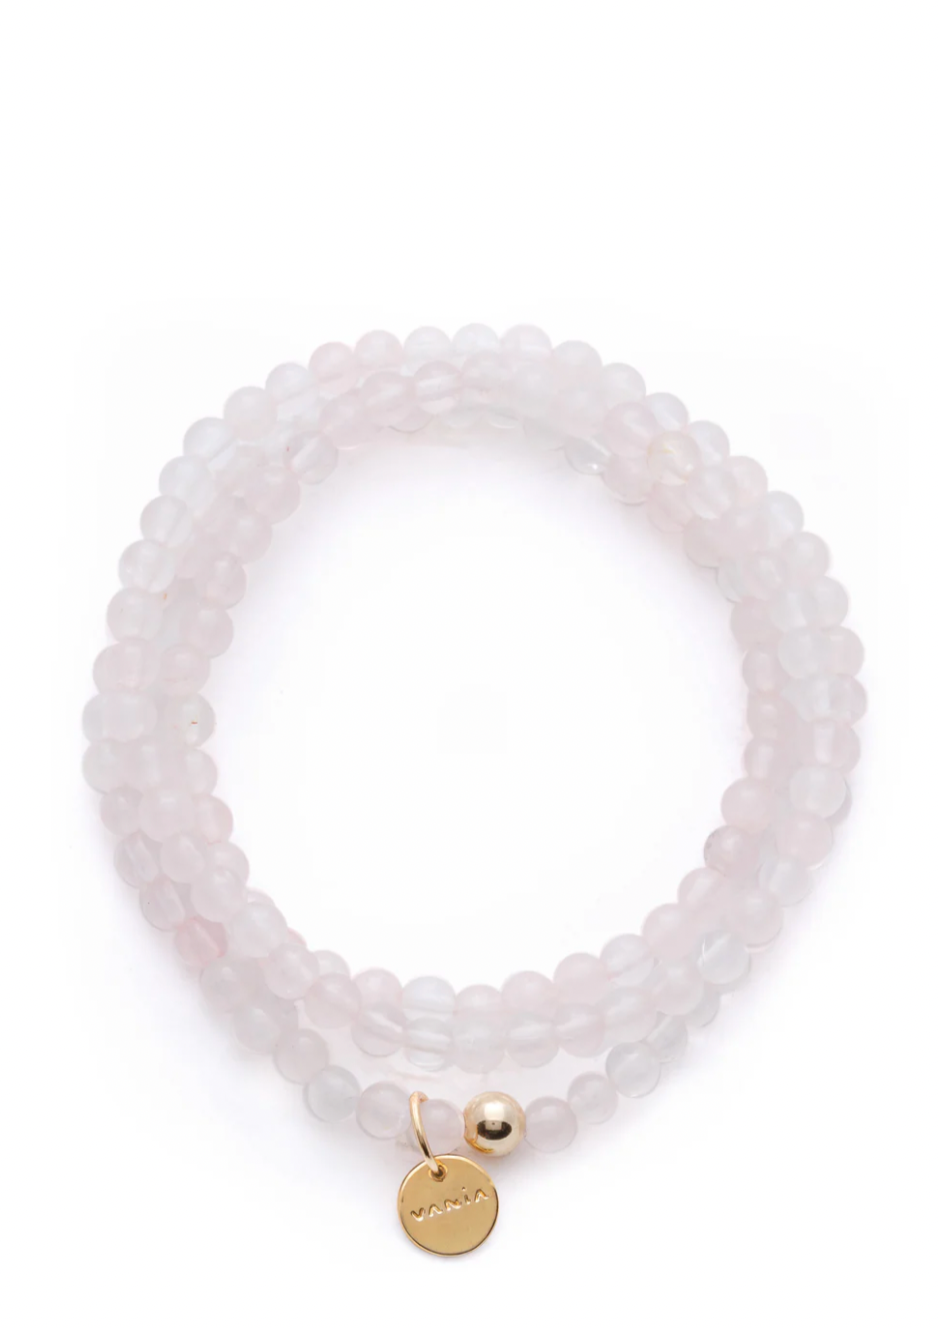 Amuleto Rose Quartz Wrap Bracelet - Small bead/Gold Rose Quartz is believed to be the teacher of the true essence of love. Rumor has it that Ancient Egyptians used to ground rose quartz to a fine powder to make facial masks, illustrating the importance of self-care and that the pouring of love begins within. By wearing this bracelet be reminded that the greatest love you can offer yourself first is unconditional self-love. 